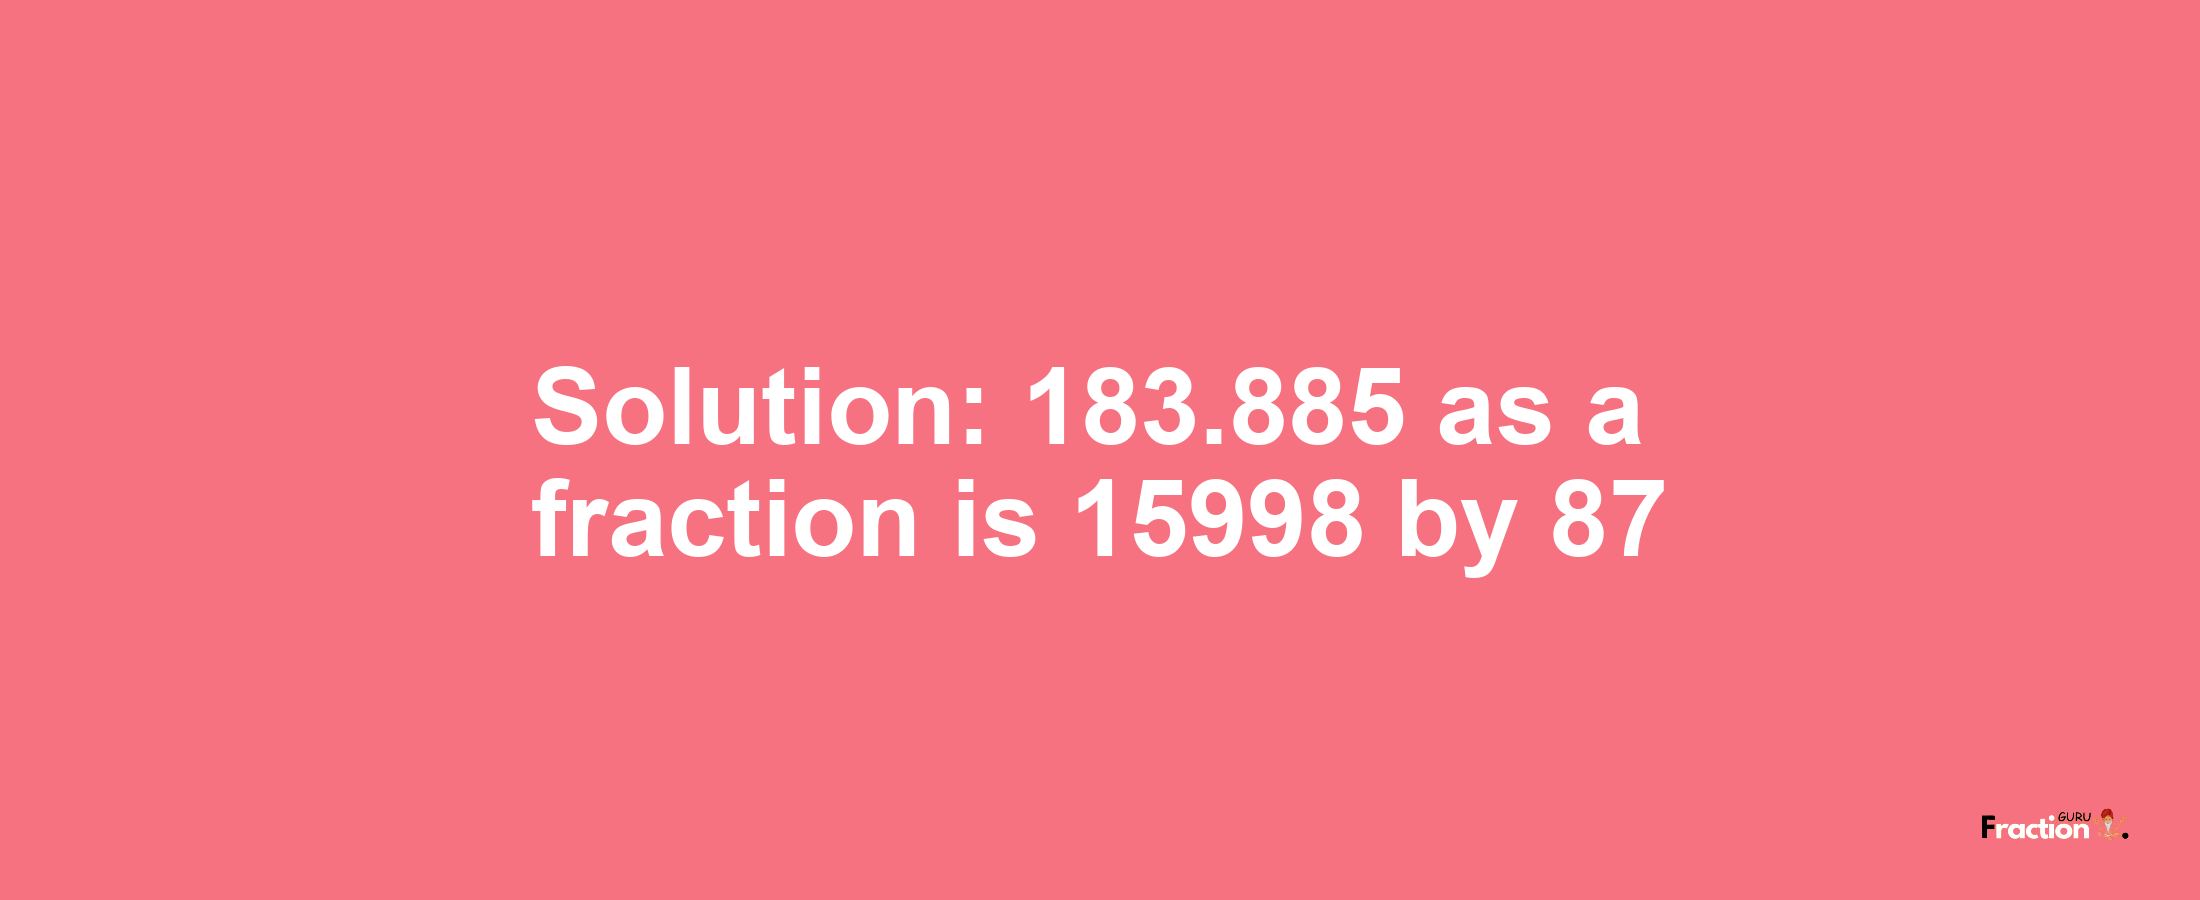 Solution:183.885 as a fraction is 15998/87